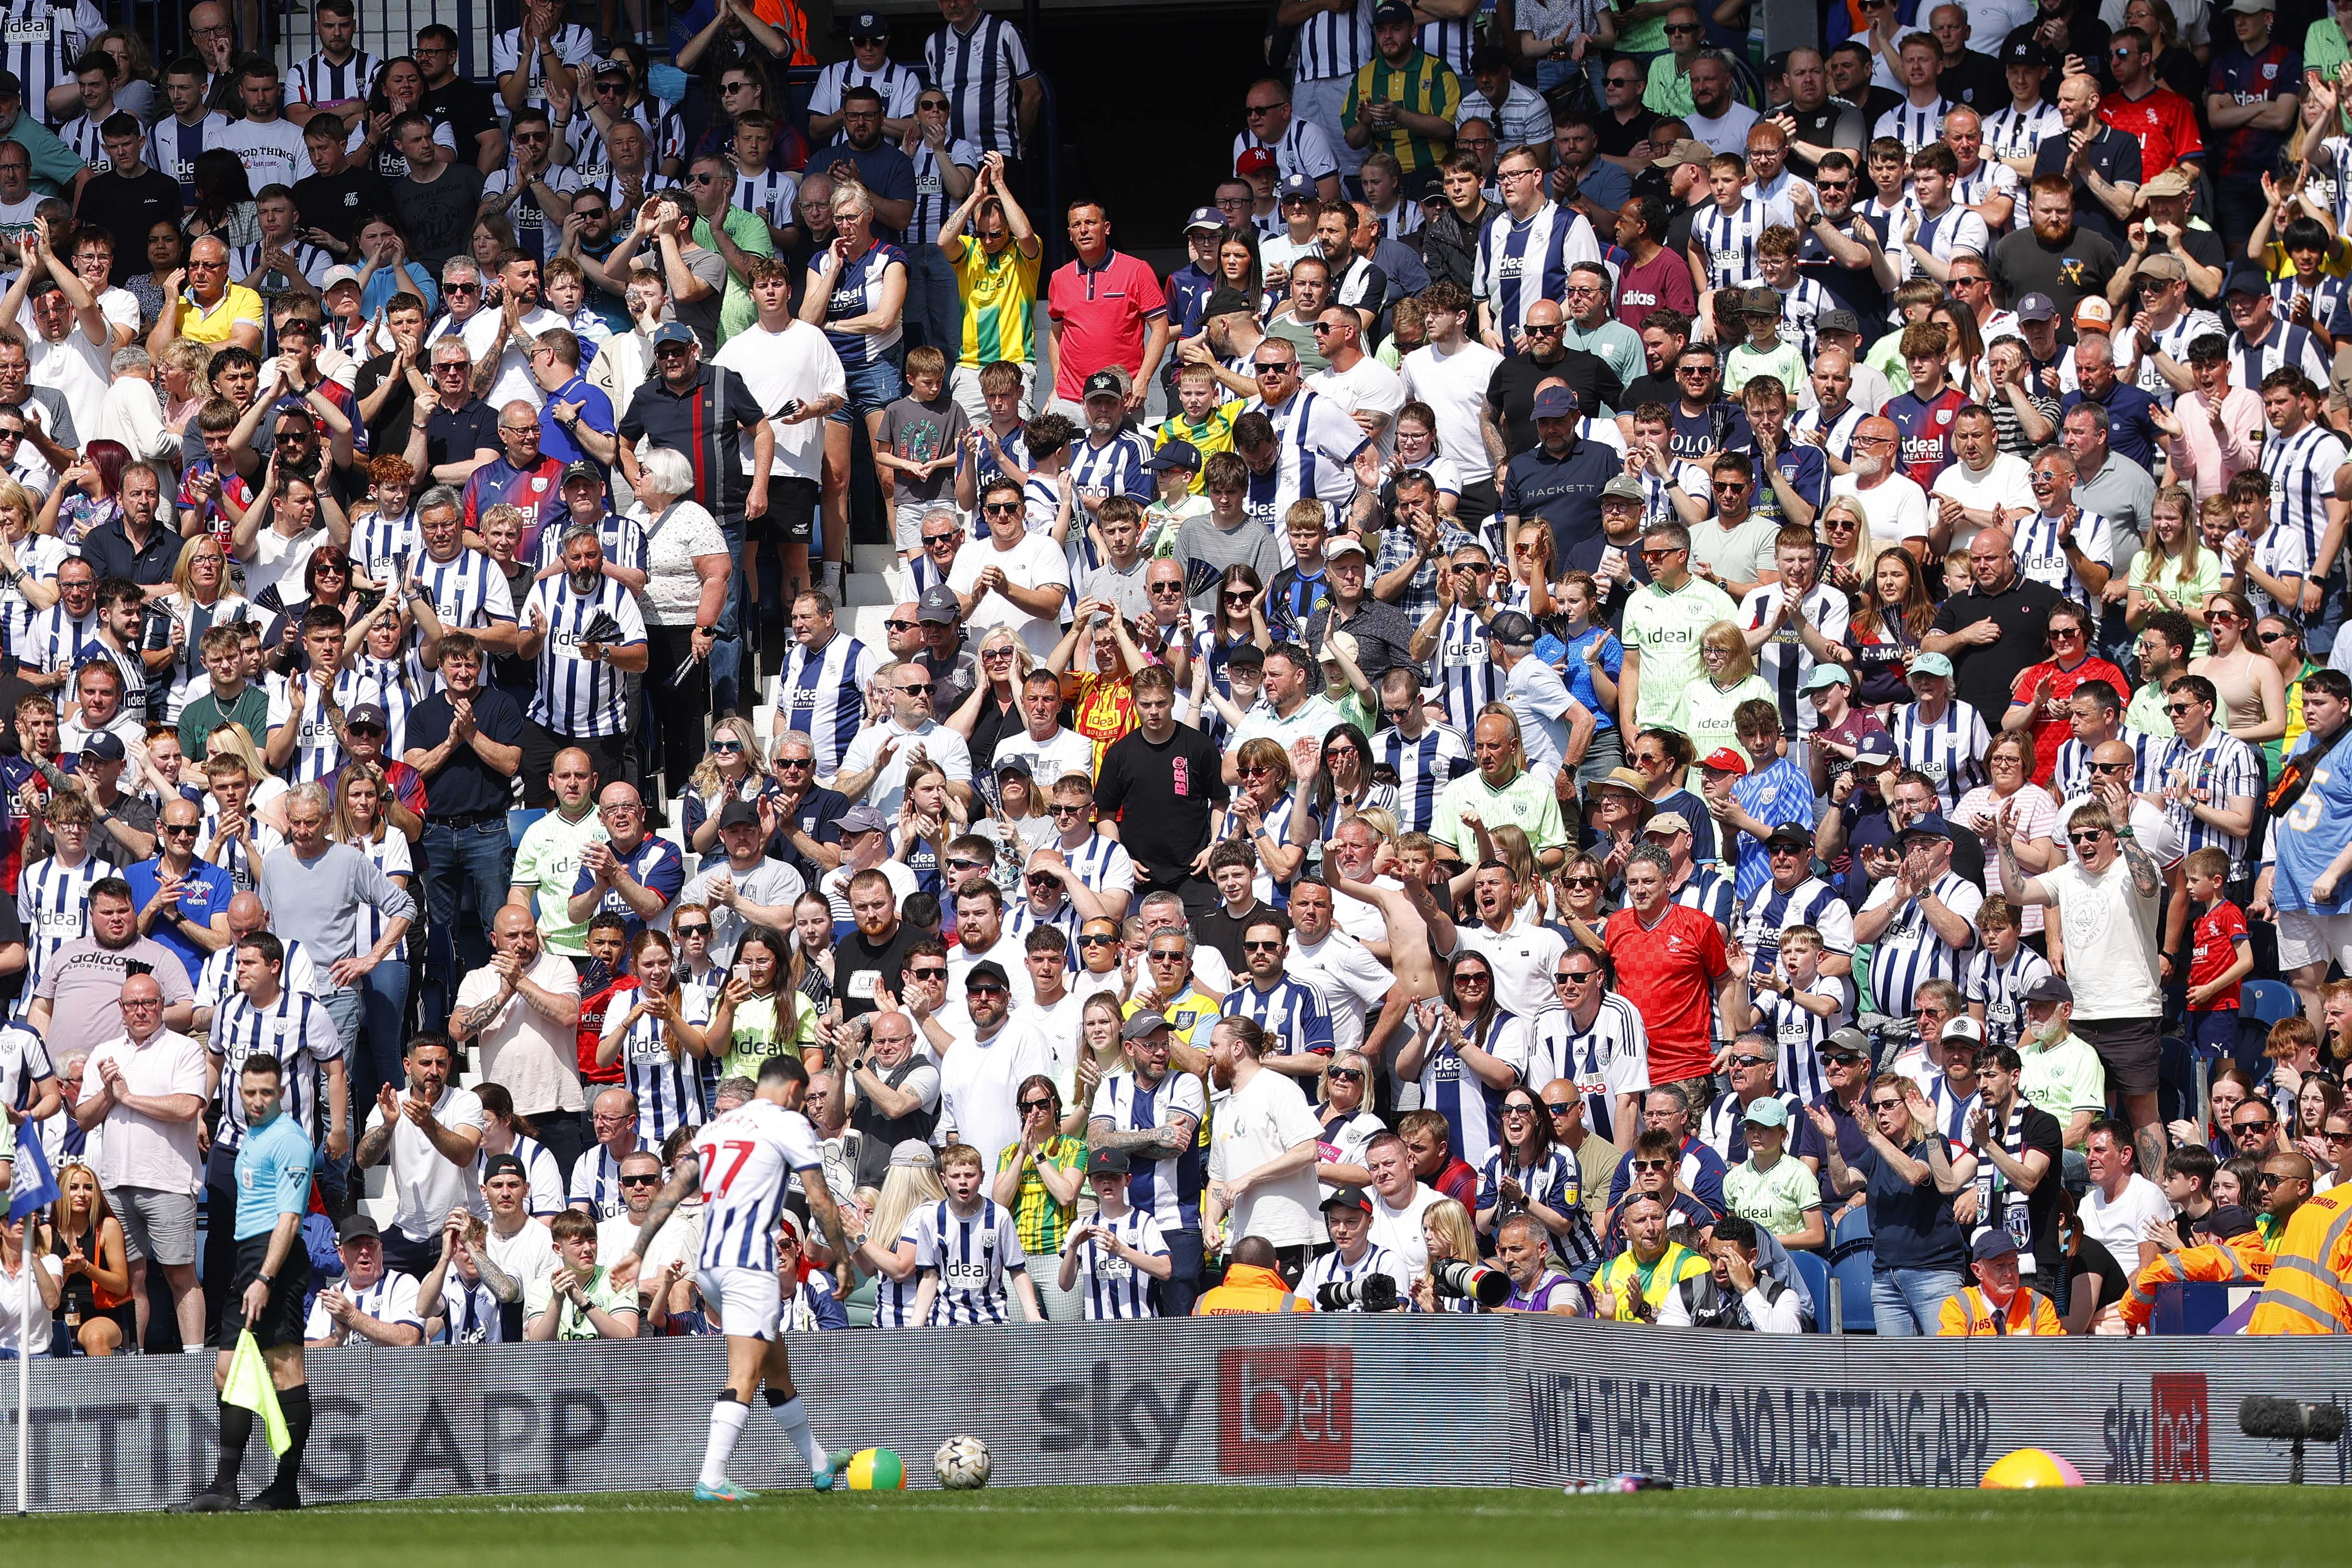 Alex Mowatt prepares to take a corner against Southampton at The Hawthorns with several Albion fans behind him